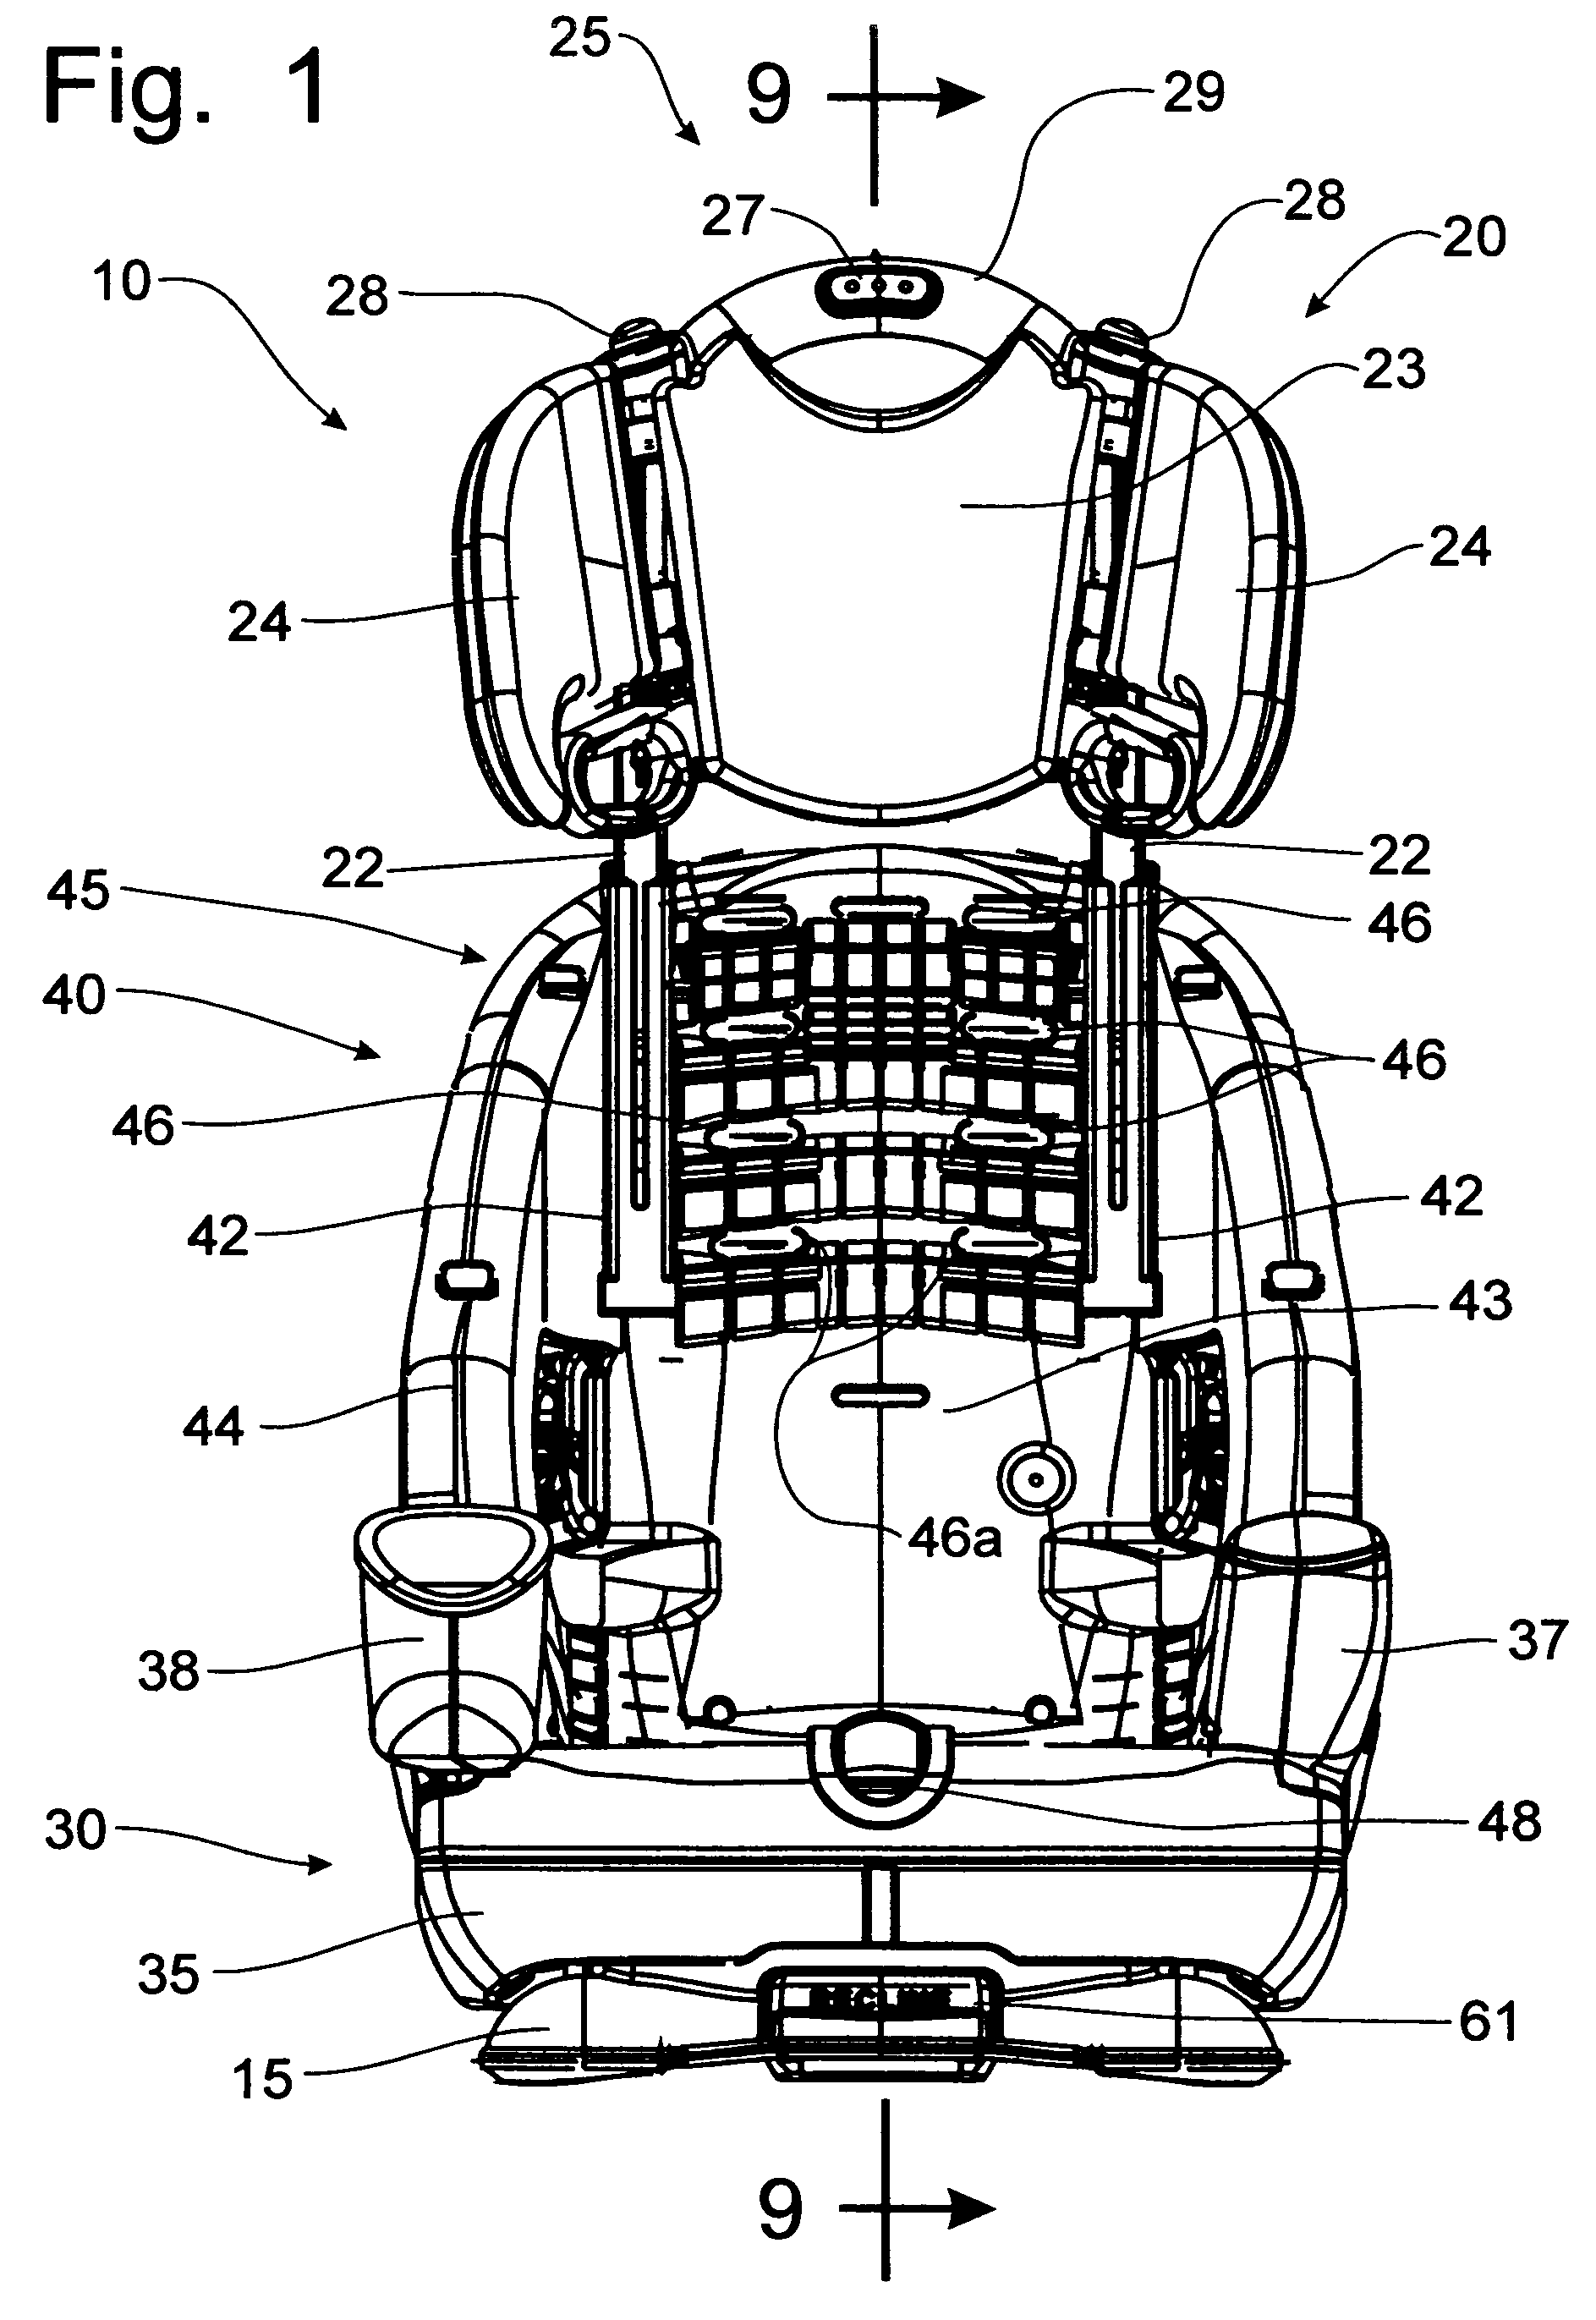 Child car seat with multiple use configurations